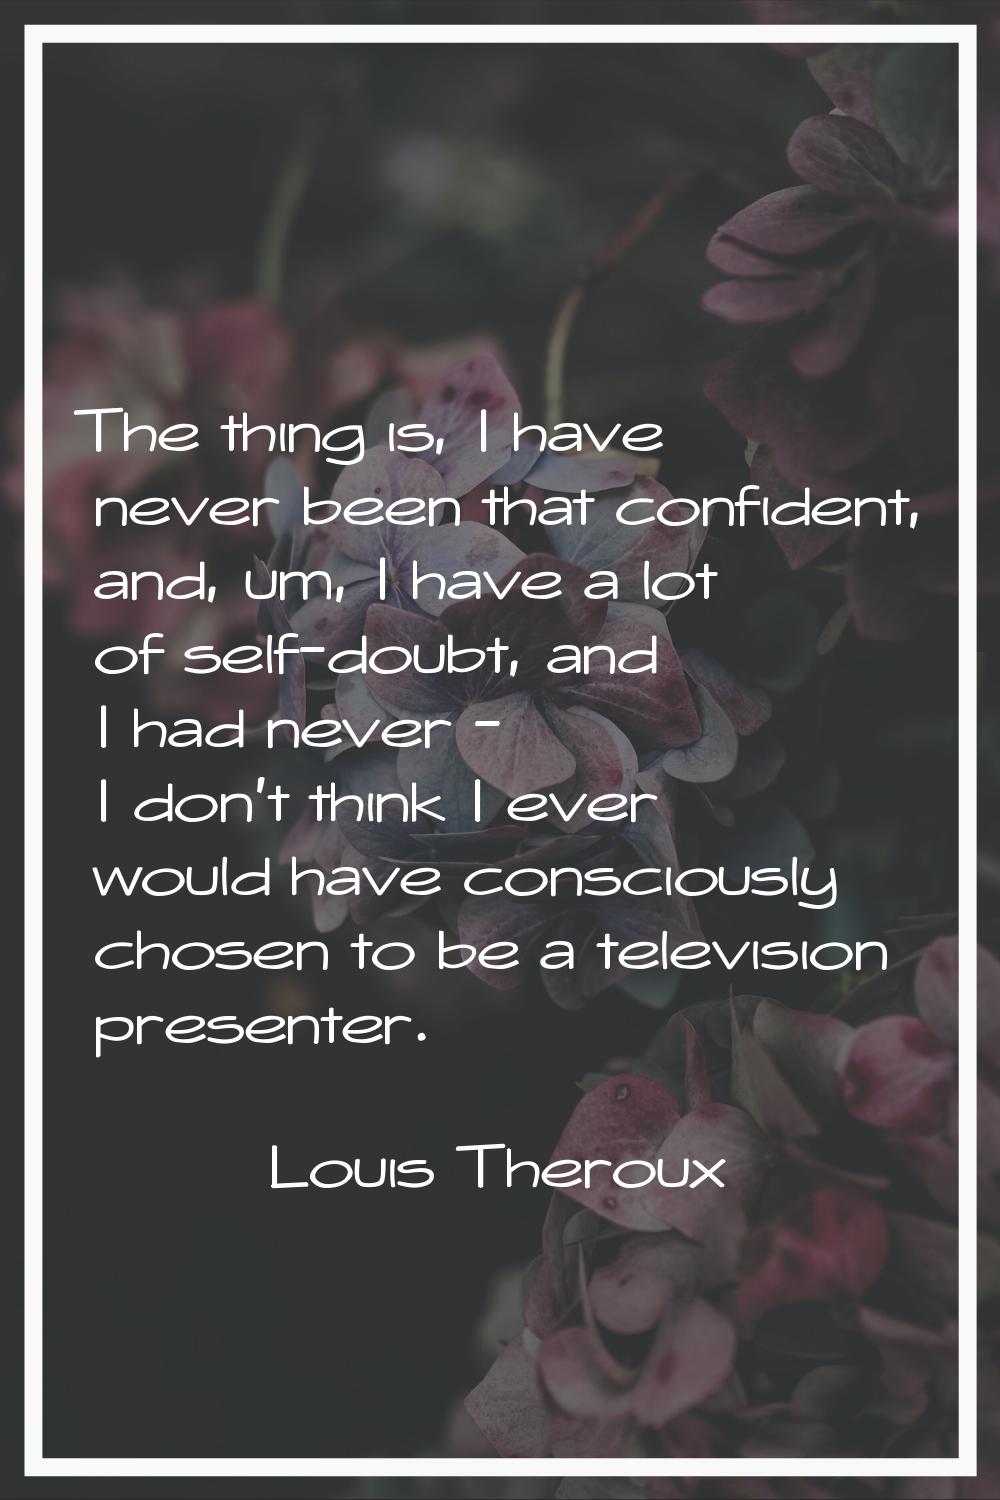 The thing is, I have never been that confident, and, um, I have a lot of self-doubt, and I had neve